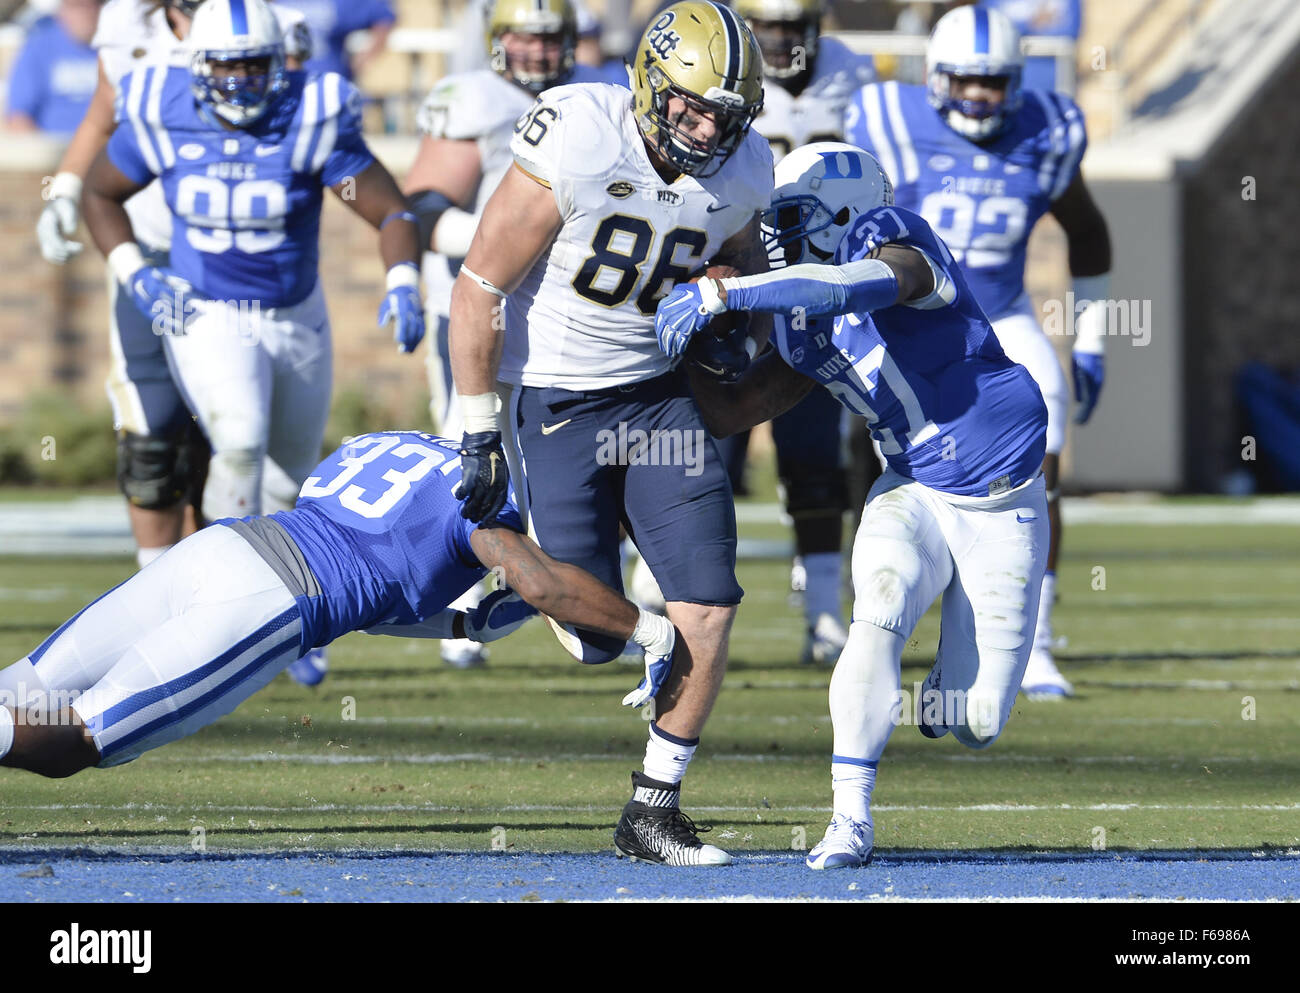 Durham, North Carolina, USA. 14th Nov, 2015. J.P. Holtz (86) of Pittsburgh moves the ball against DeVon Edwards (27) and Deondre Singleton (33) of Duke. The Duke Blue Devils hosted the University of Pittsburgh Panthers at the Wallace Wade Stadium in Durham, N.C. Pittsburgh won 31-13. Credit:  Fabian Radulescu/ZUMA Wire/Alamy Live News Stock Photo